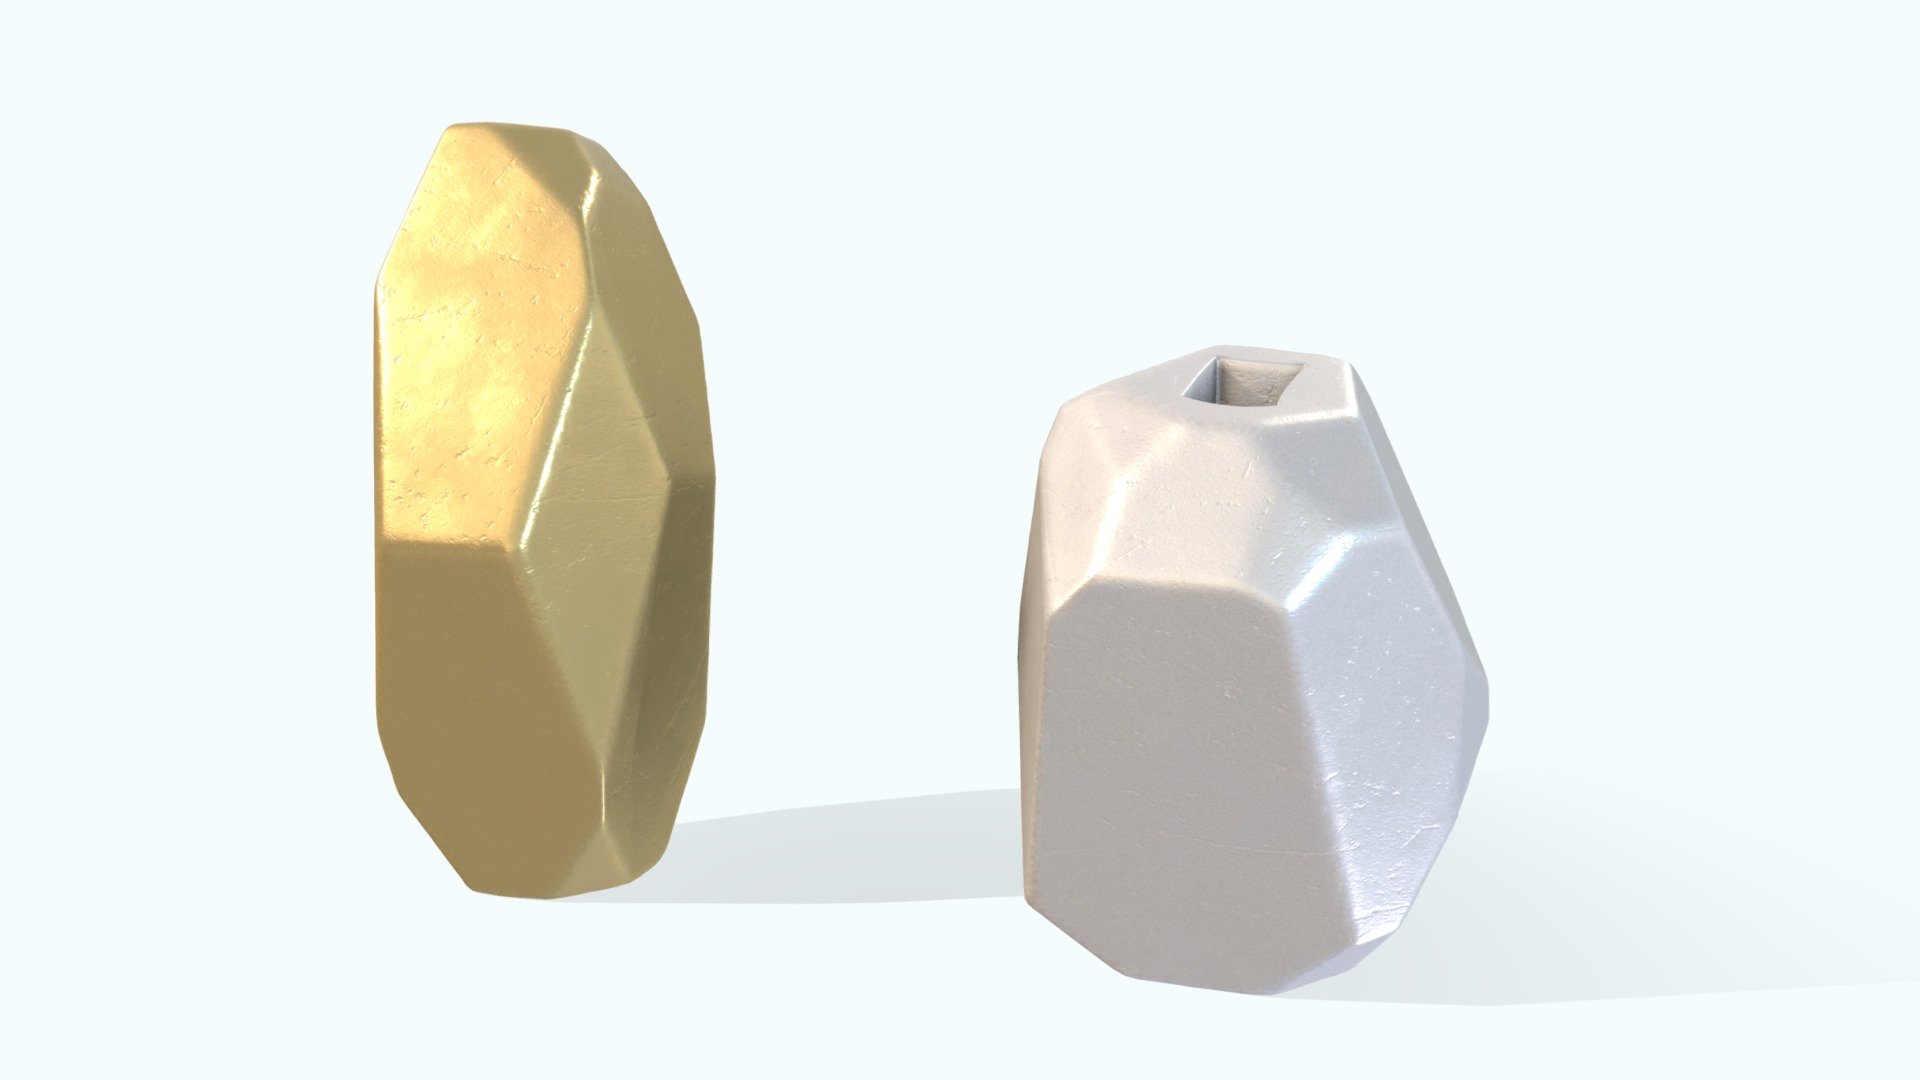 The 3D Model of Von Gold Geometric Vase modeled according to the reference. The model can be used for interior design in different premises like living group in modern and minimalistic style. The main component are gold and silver metal base. The file is neatly modeled, grouped together 3d model